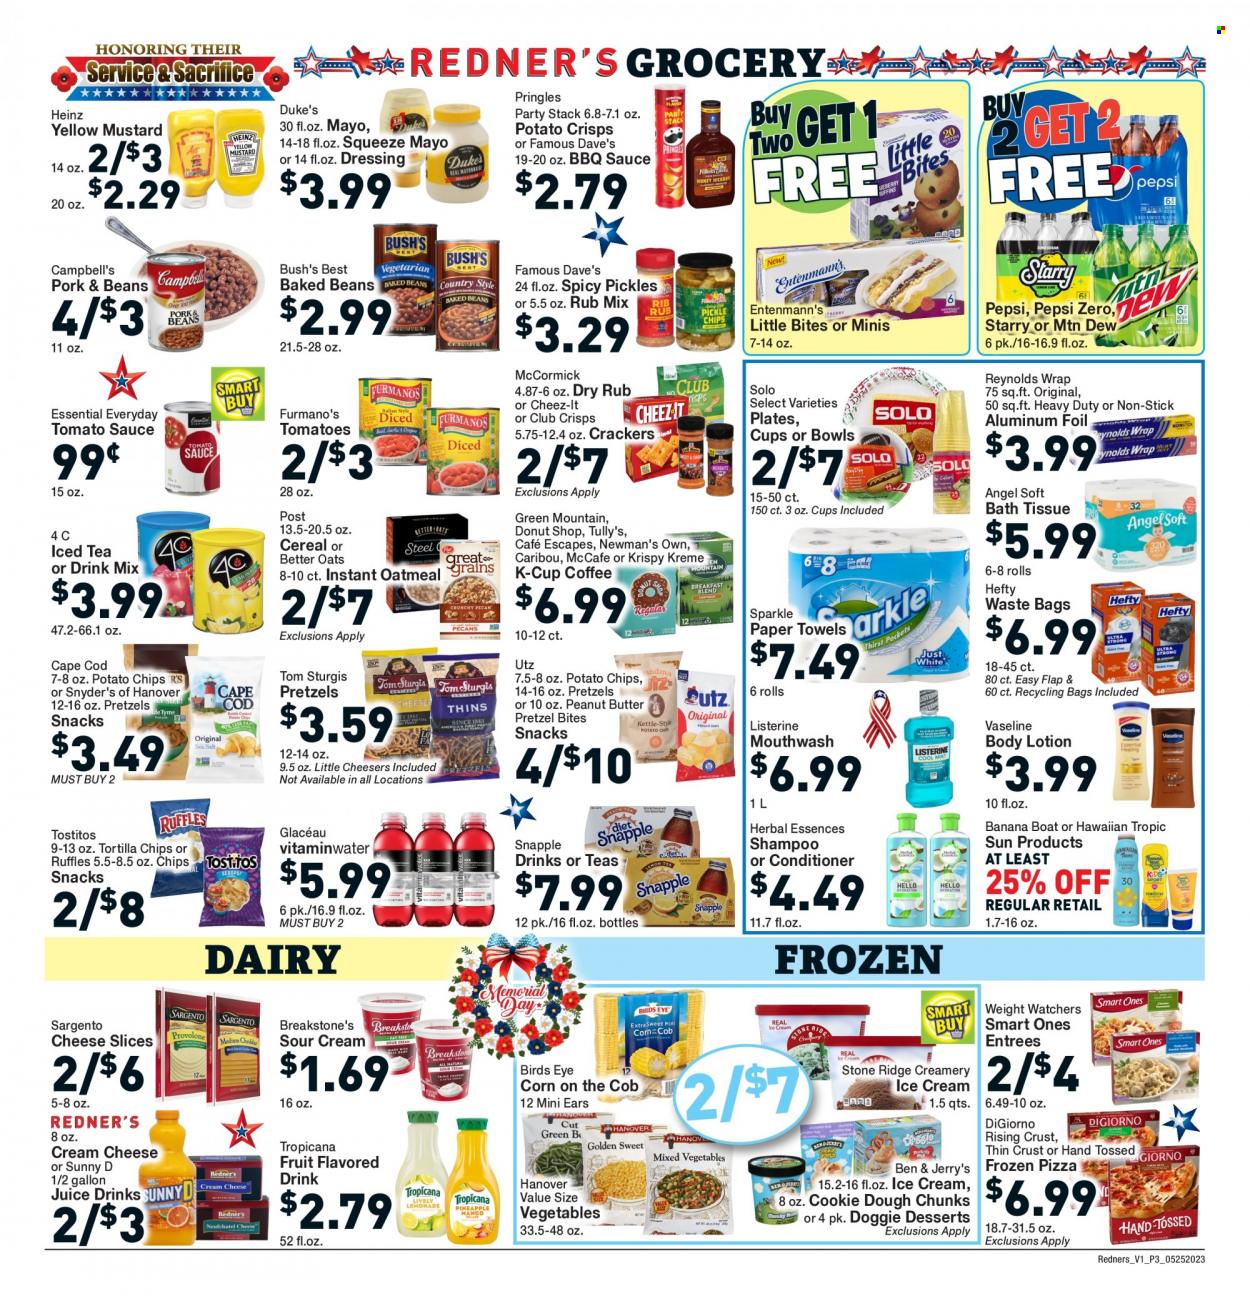 thumbnail - Redner's Markets Flyer - 05/25/2023 - 05/31/2023 - Sales products - pretzels, Entenmann's, dessert, corn, Campbell's, pizza, sauce, Bird's Eye, snack, cream cheese, sliced cheese, Sargento, sour cream, ice cream, Ben & Jerry's, crackers, Little Bites, tortilla chips, potato crisps, potato chips, Pringles, Cheez-It, Ruffles, Tostitos, salty snack, oatmeal, oats, tomato sauce, Heinz, pickles, baked beans, cereals, BBQ sauce, mustard, dressing, peanut butter, Mountain Dew, Pepsi, juice, ice tea, soft drink, Snapple, coffee, coffee capsules, McCafe, K-Cups, Green Mountain, bath tissue, kitchen towels, paper towels, shampoo, Vaseline, Listerine, mouthwash, conditioner, Herbal Essences, body lotion, Hawaiian Tropic, Hefty, trash bags, plate. Page 5.